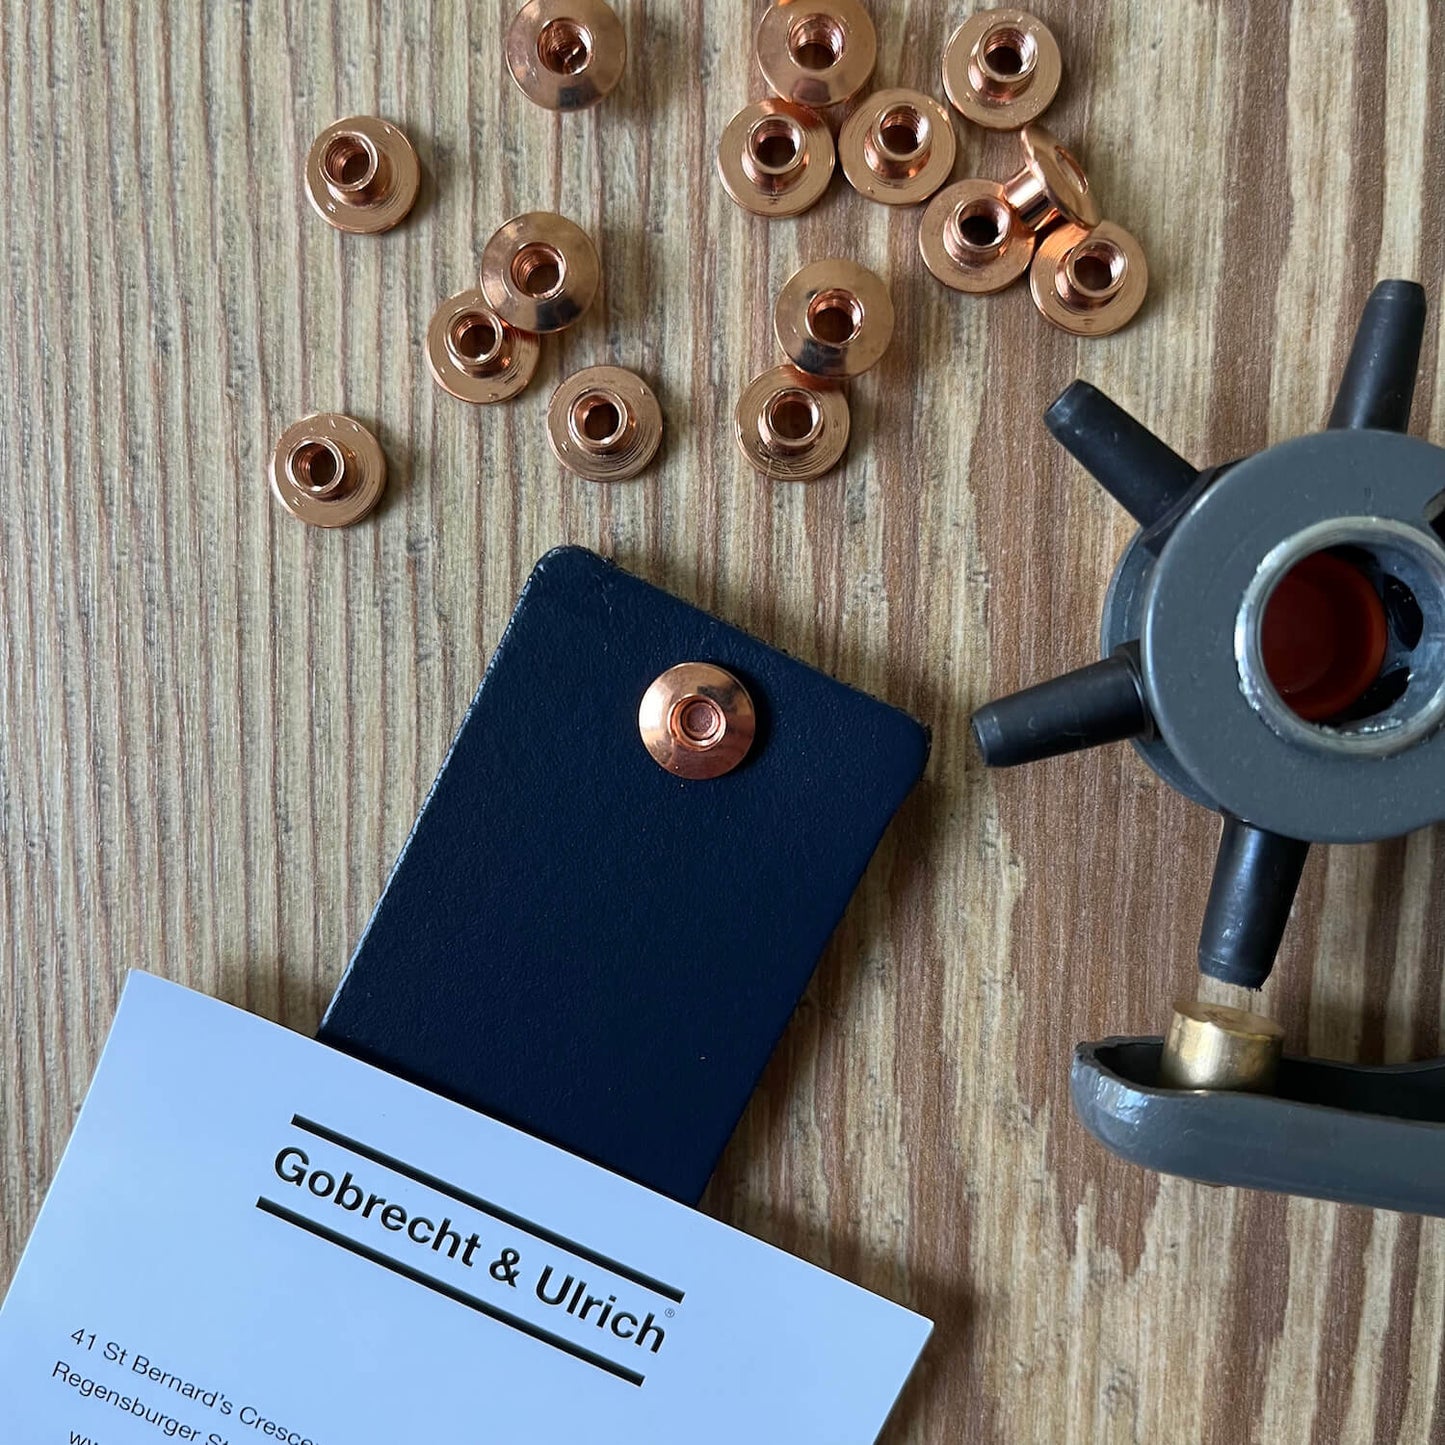 Short copper binding screws scattered on a wooden surface, a silver binding screw fastened to a piece of dark blue leather, and a leather hole punch